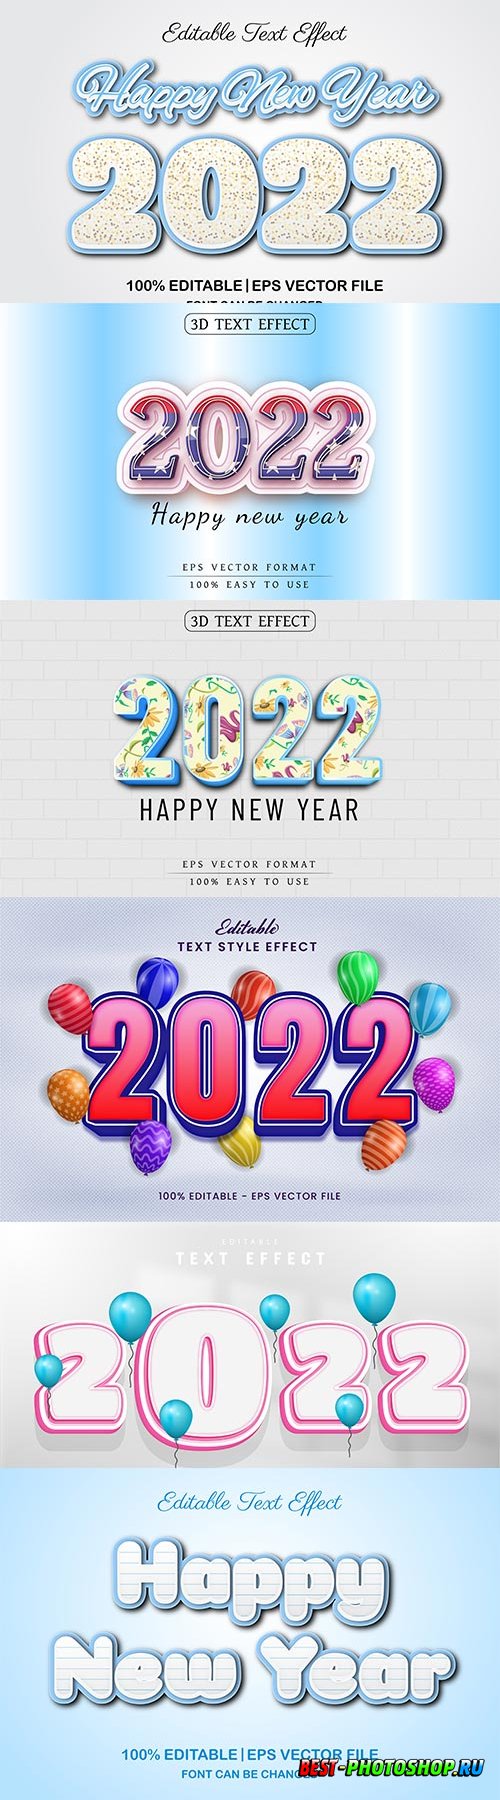 2022 New year and christmas editable text effect vector vol 26